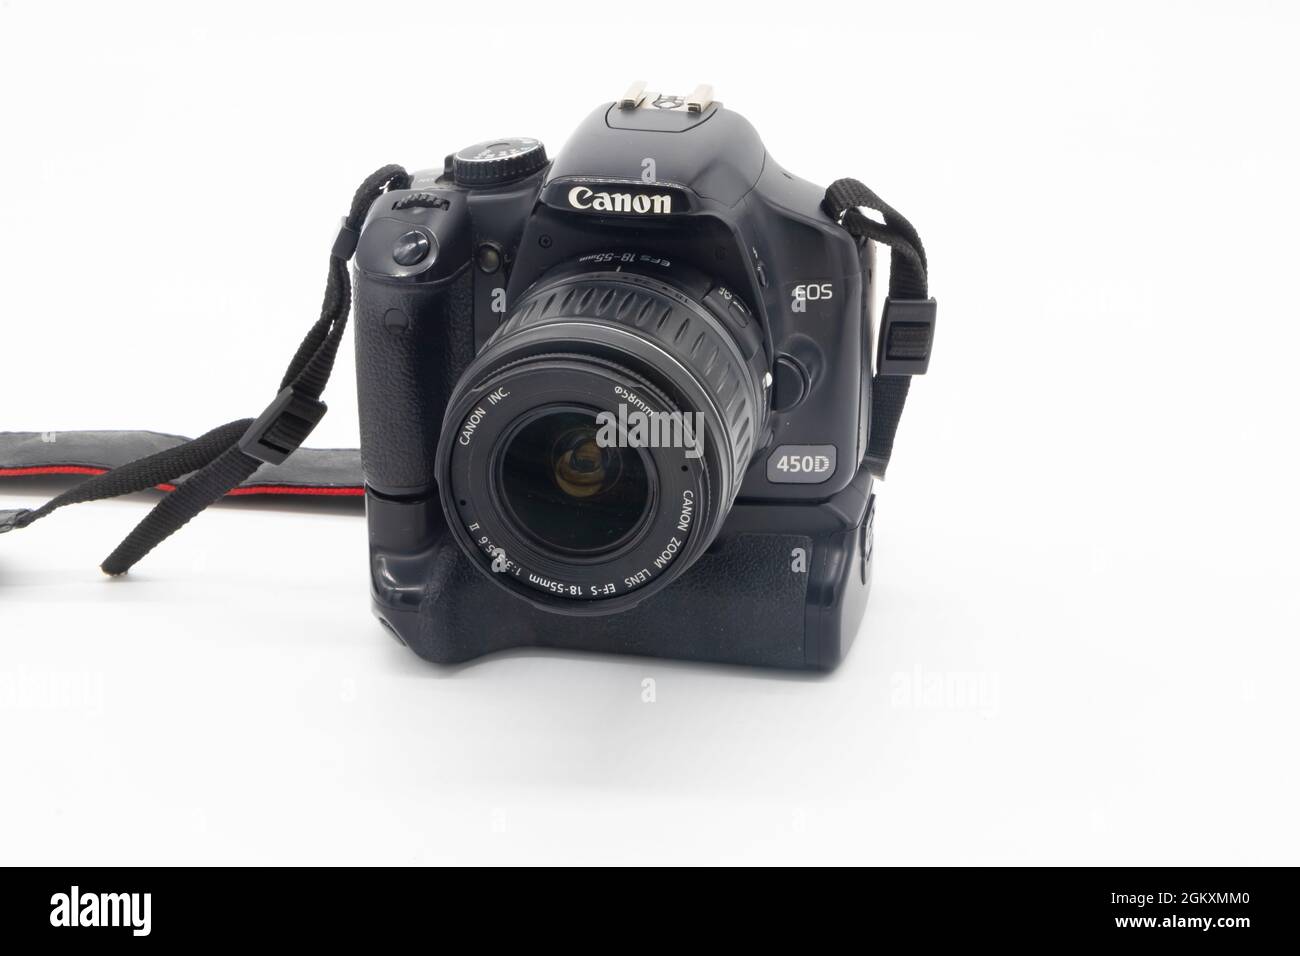 Canon 450D DSLR camera with battery pack Stock Photo